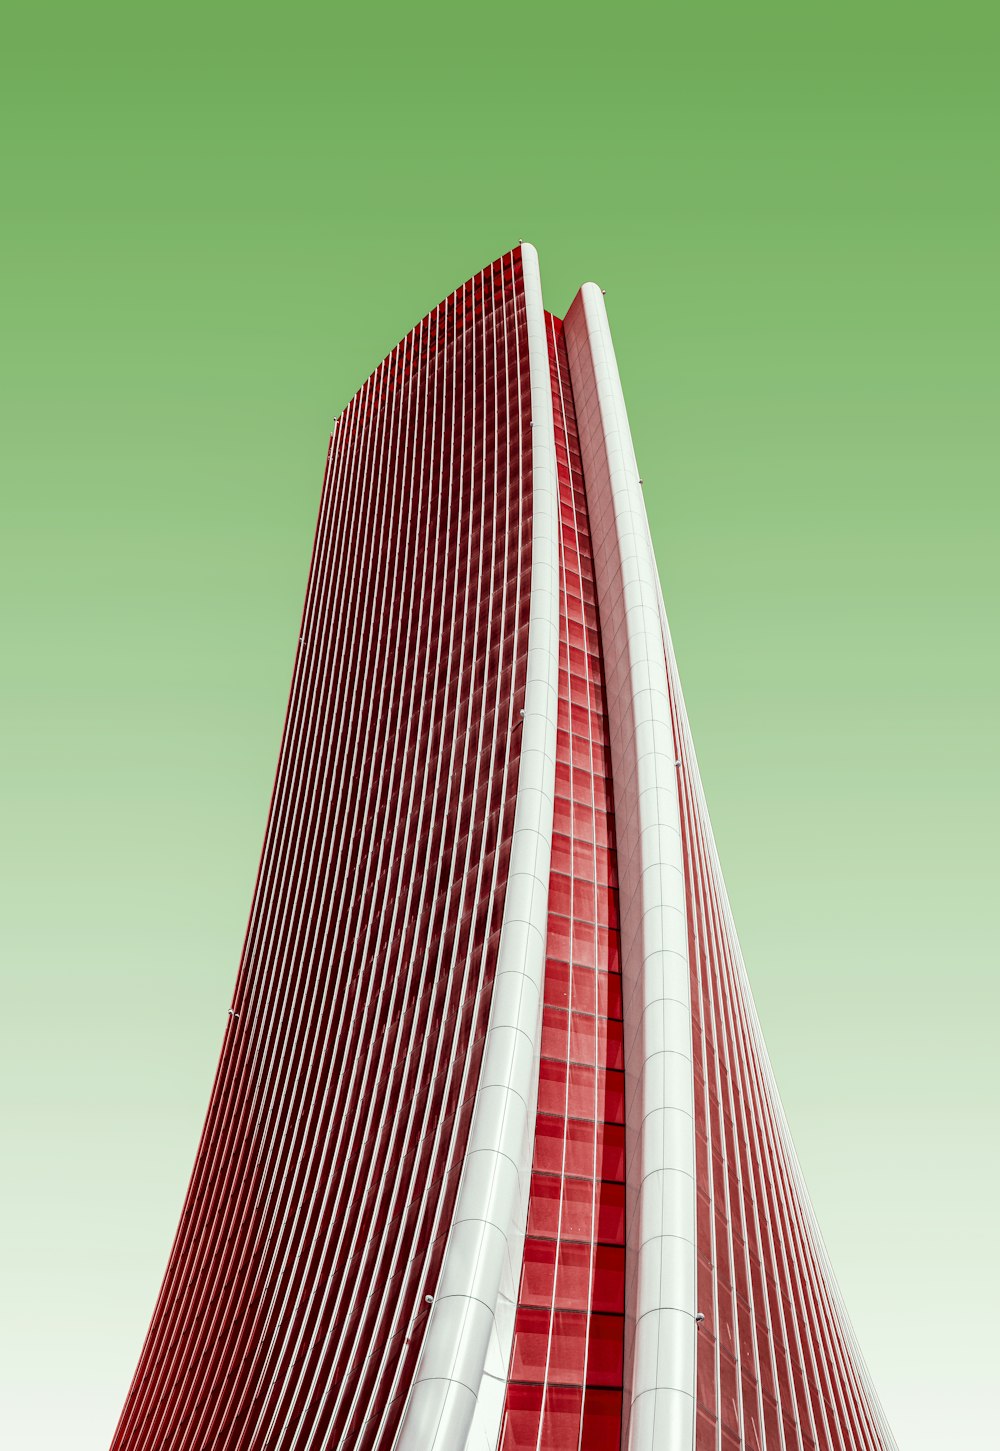 white and red high rise building